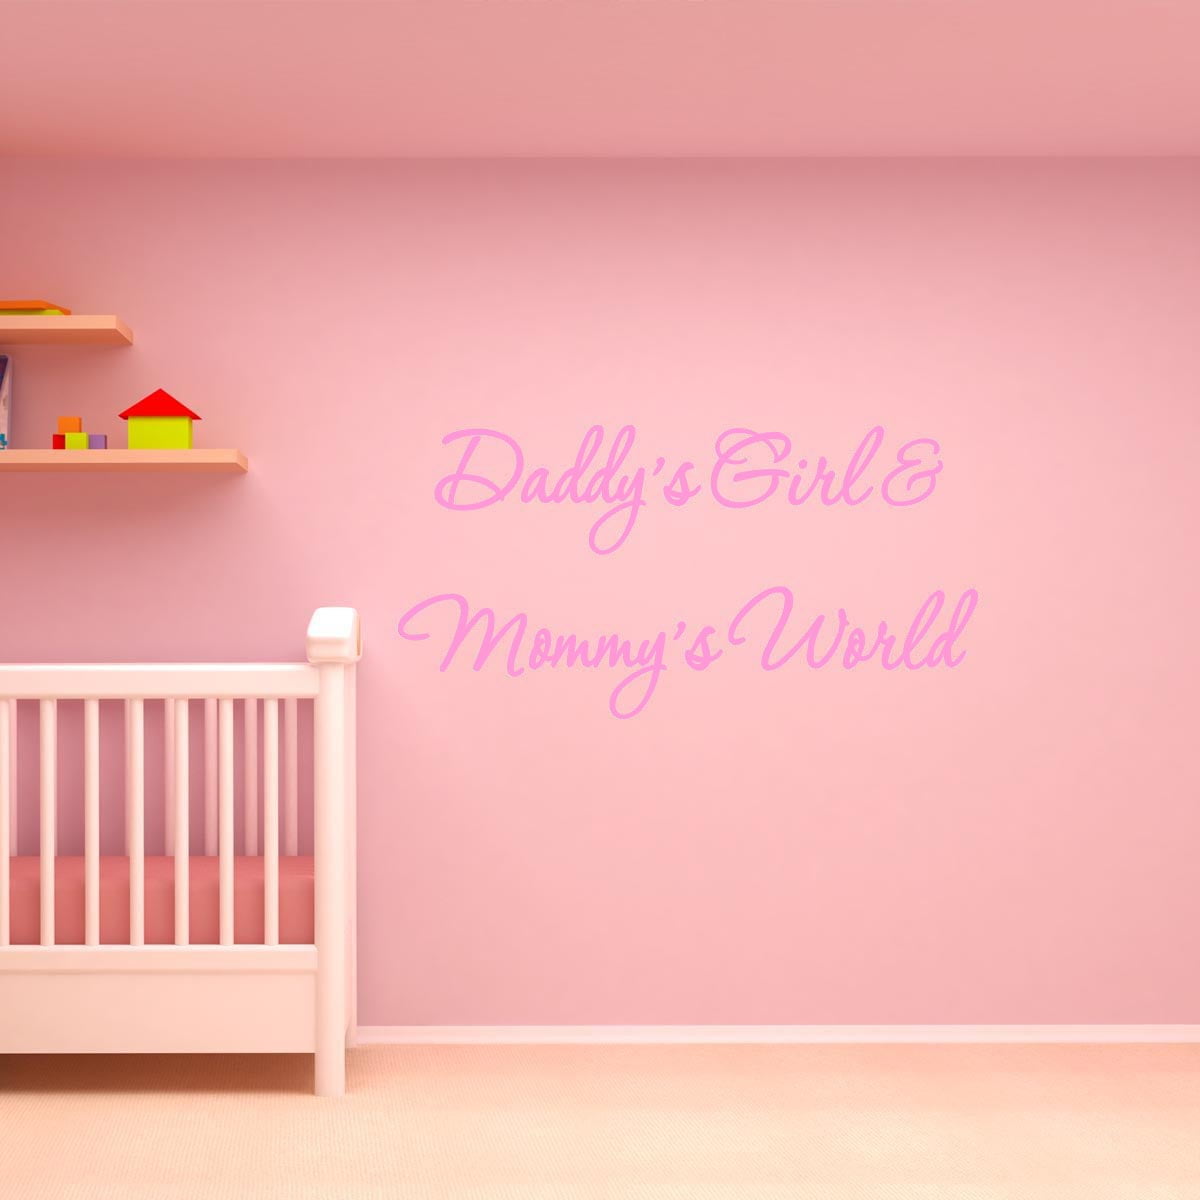 In My Mommys World & My Daddys Girl White Decor Sticker for Newborn Bedroom or Toddler Playroom Pink Black Blue Other Colors Purple Baby Girl Nursery Vinyl Wall Decal 